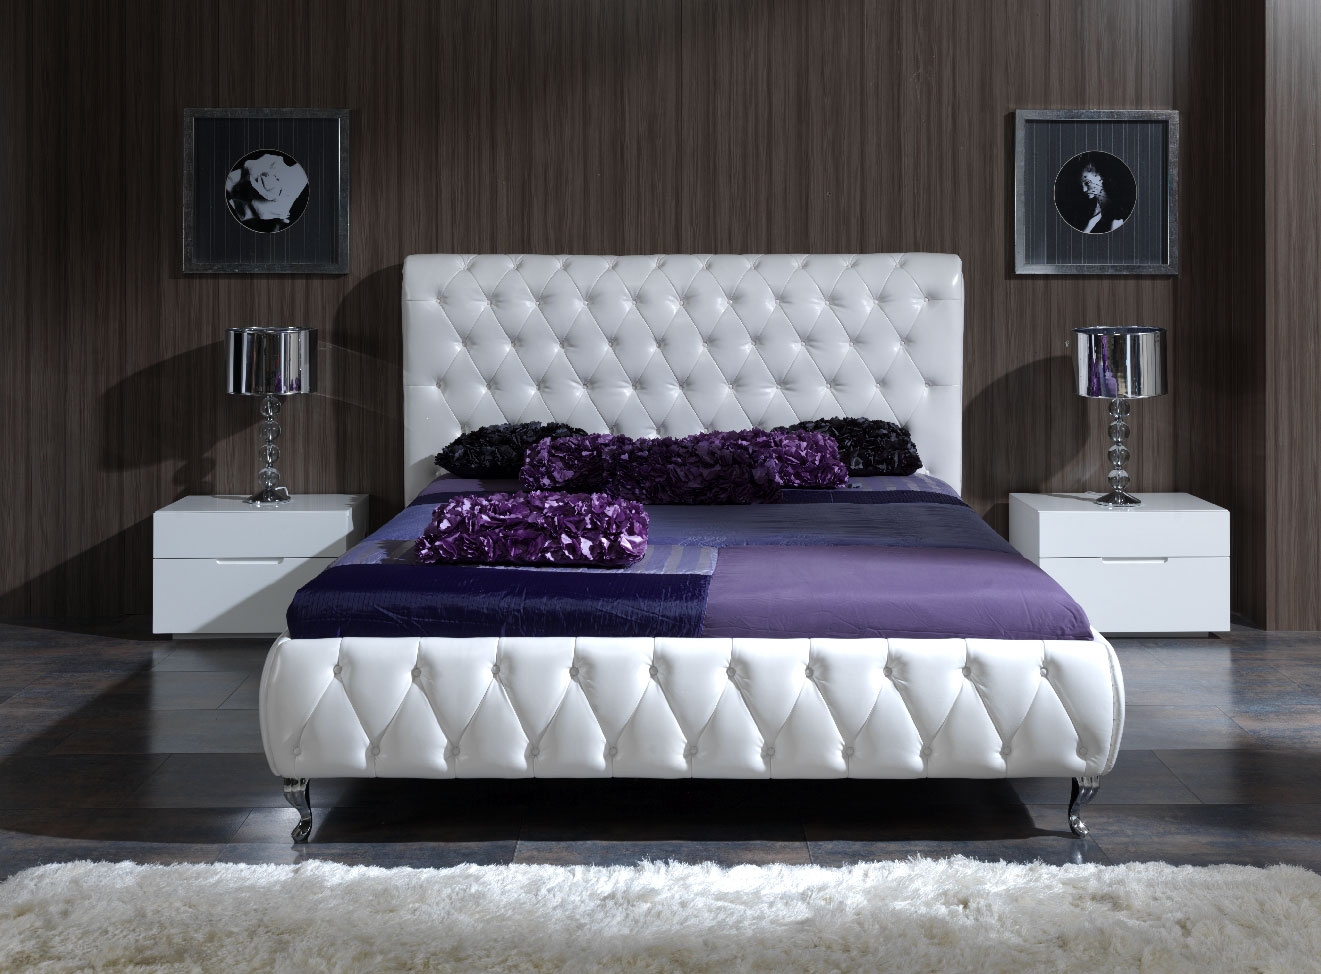 How to create a clean calm modern king
bedroom sets white